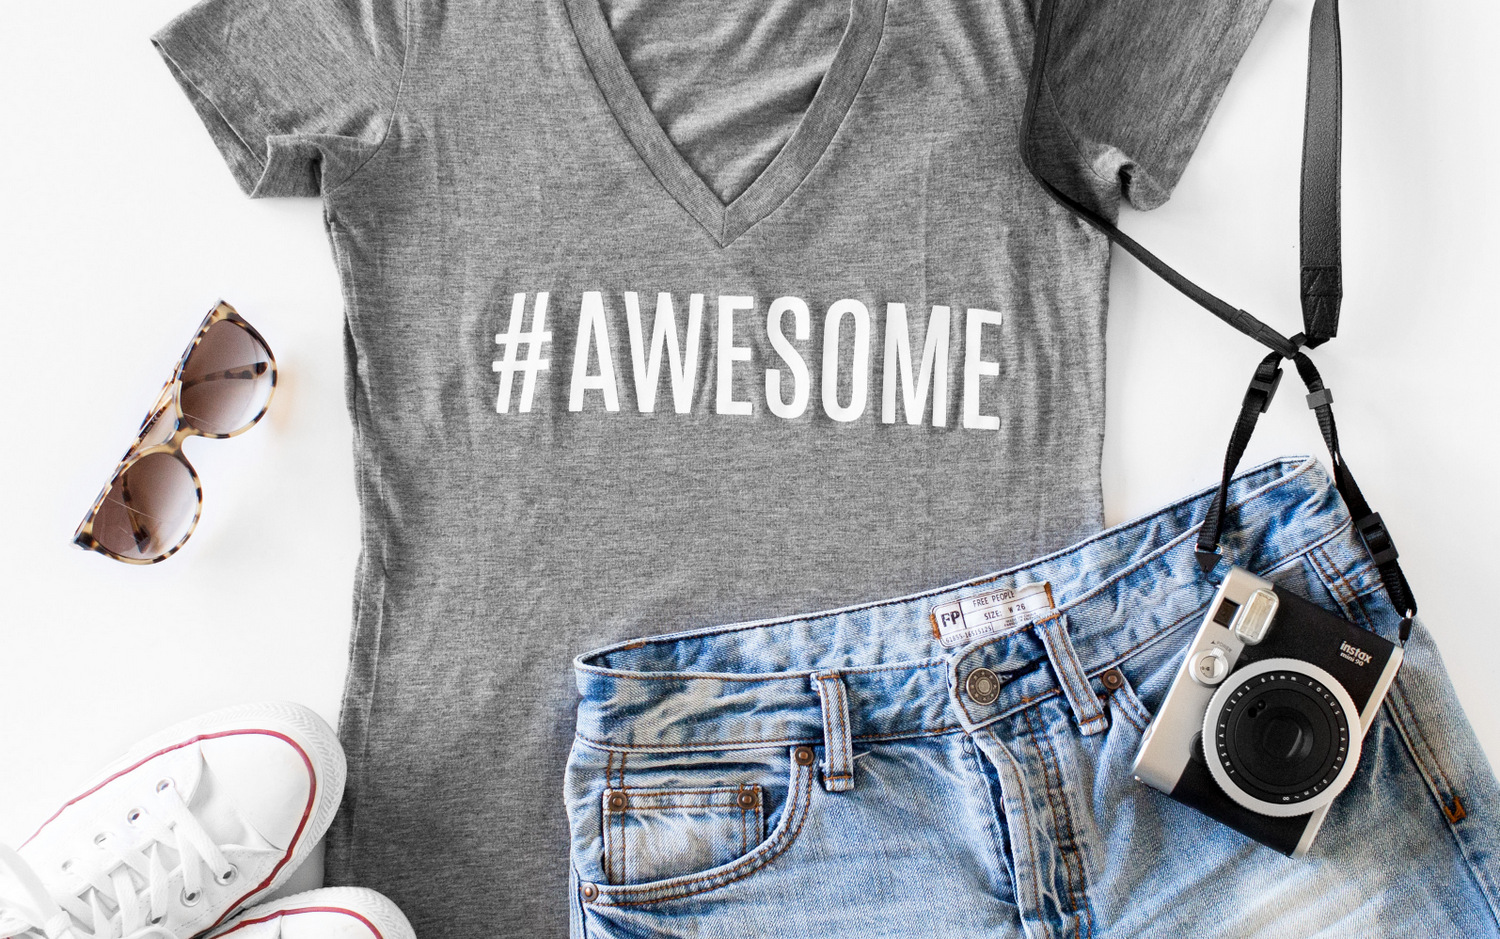 #awesome tee designed by the tomkat studio